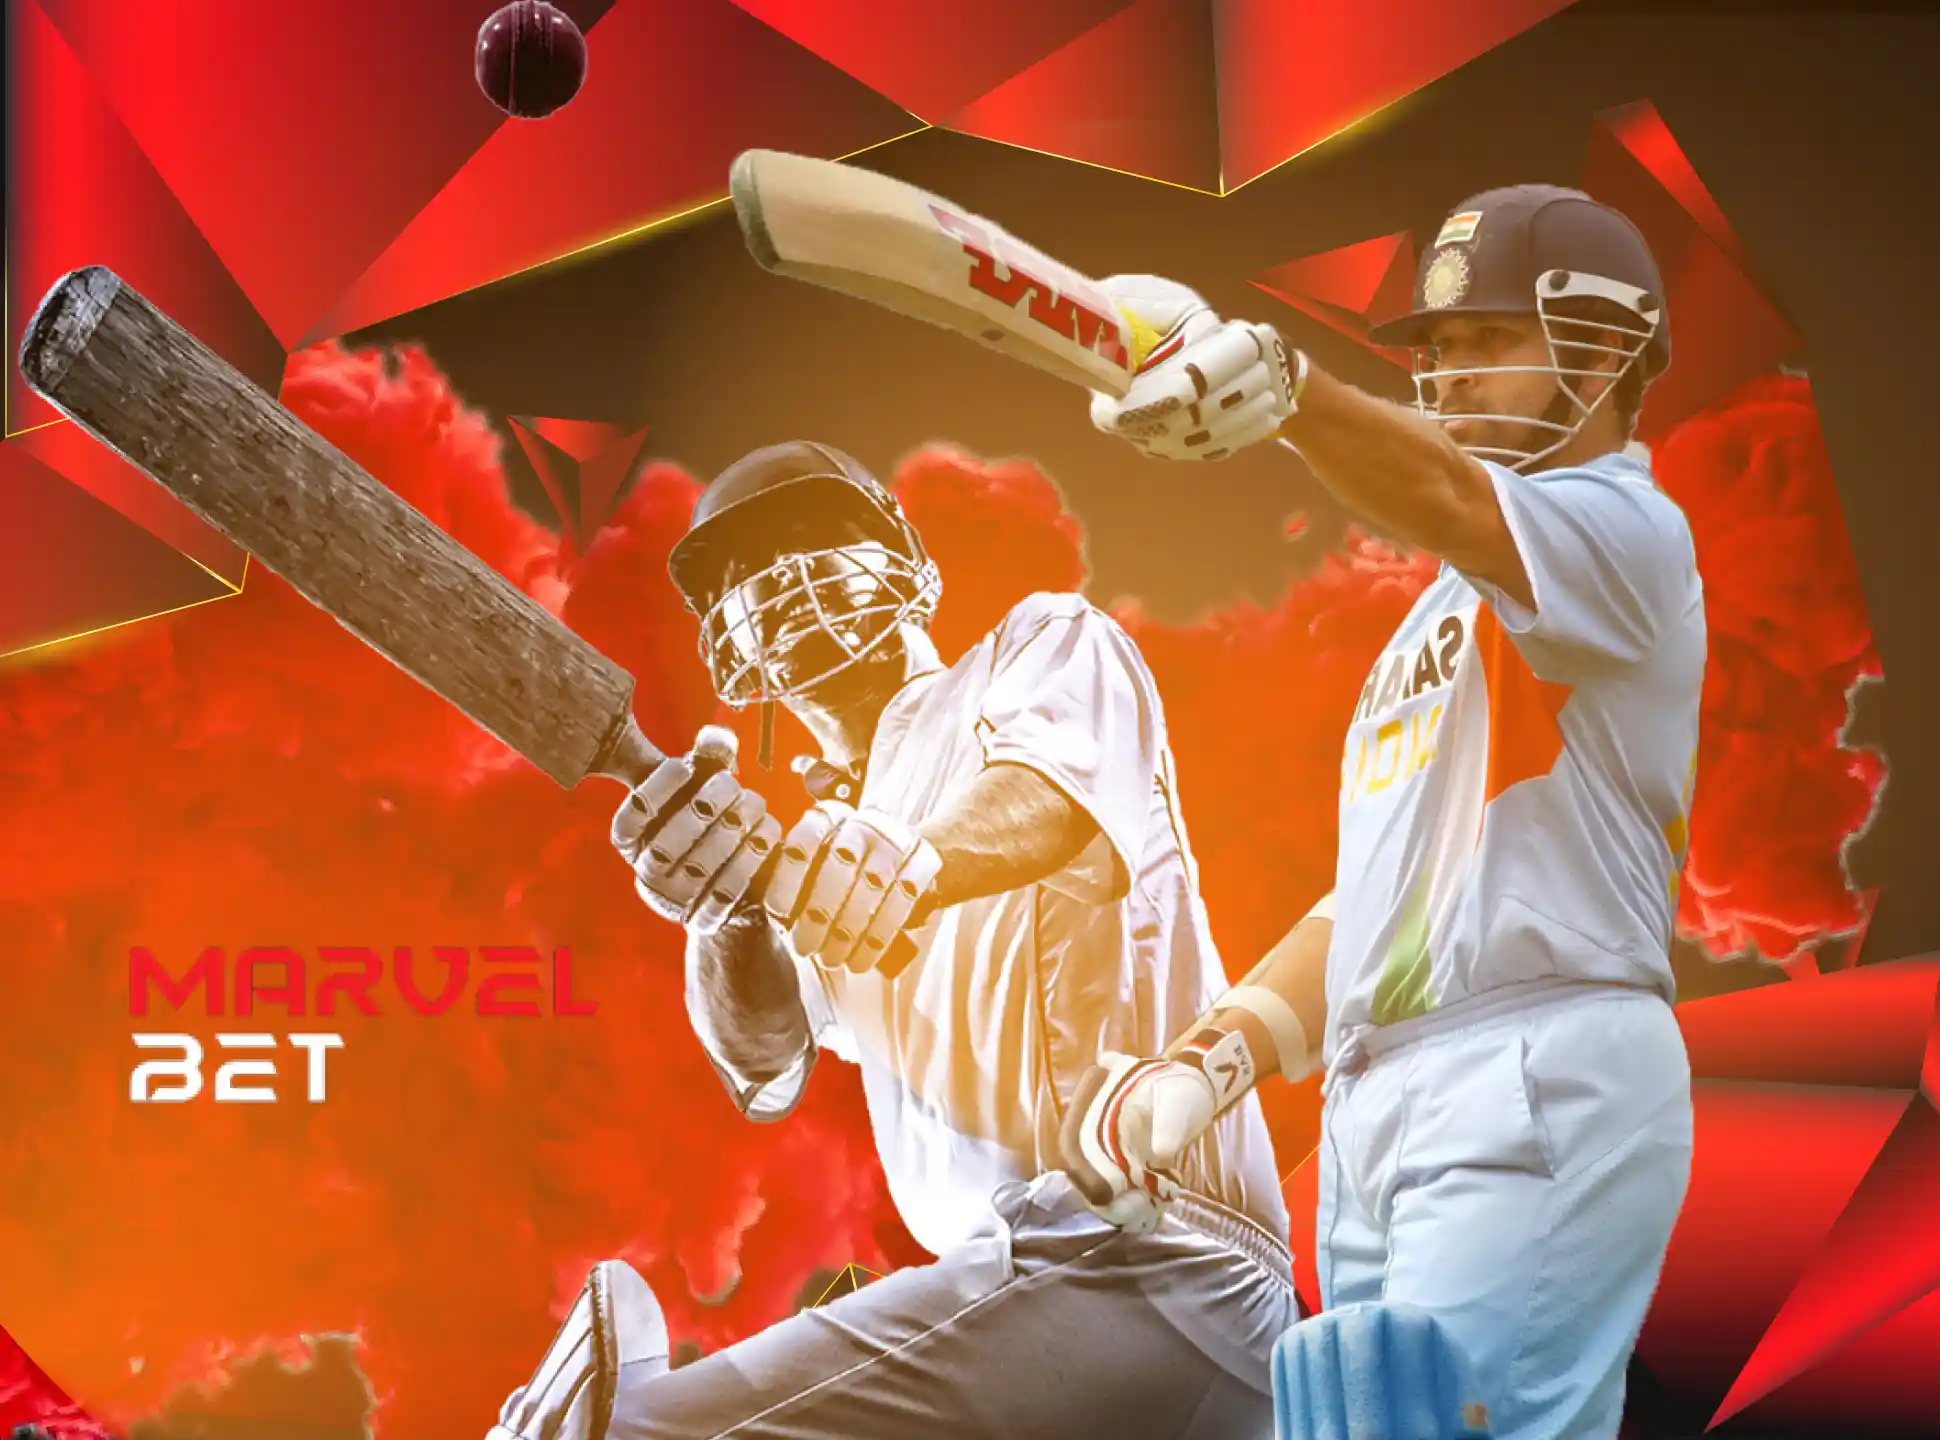 MarvelBet allows betting on different cricket leagues and events.